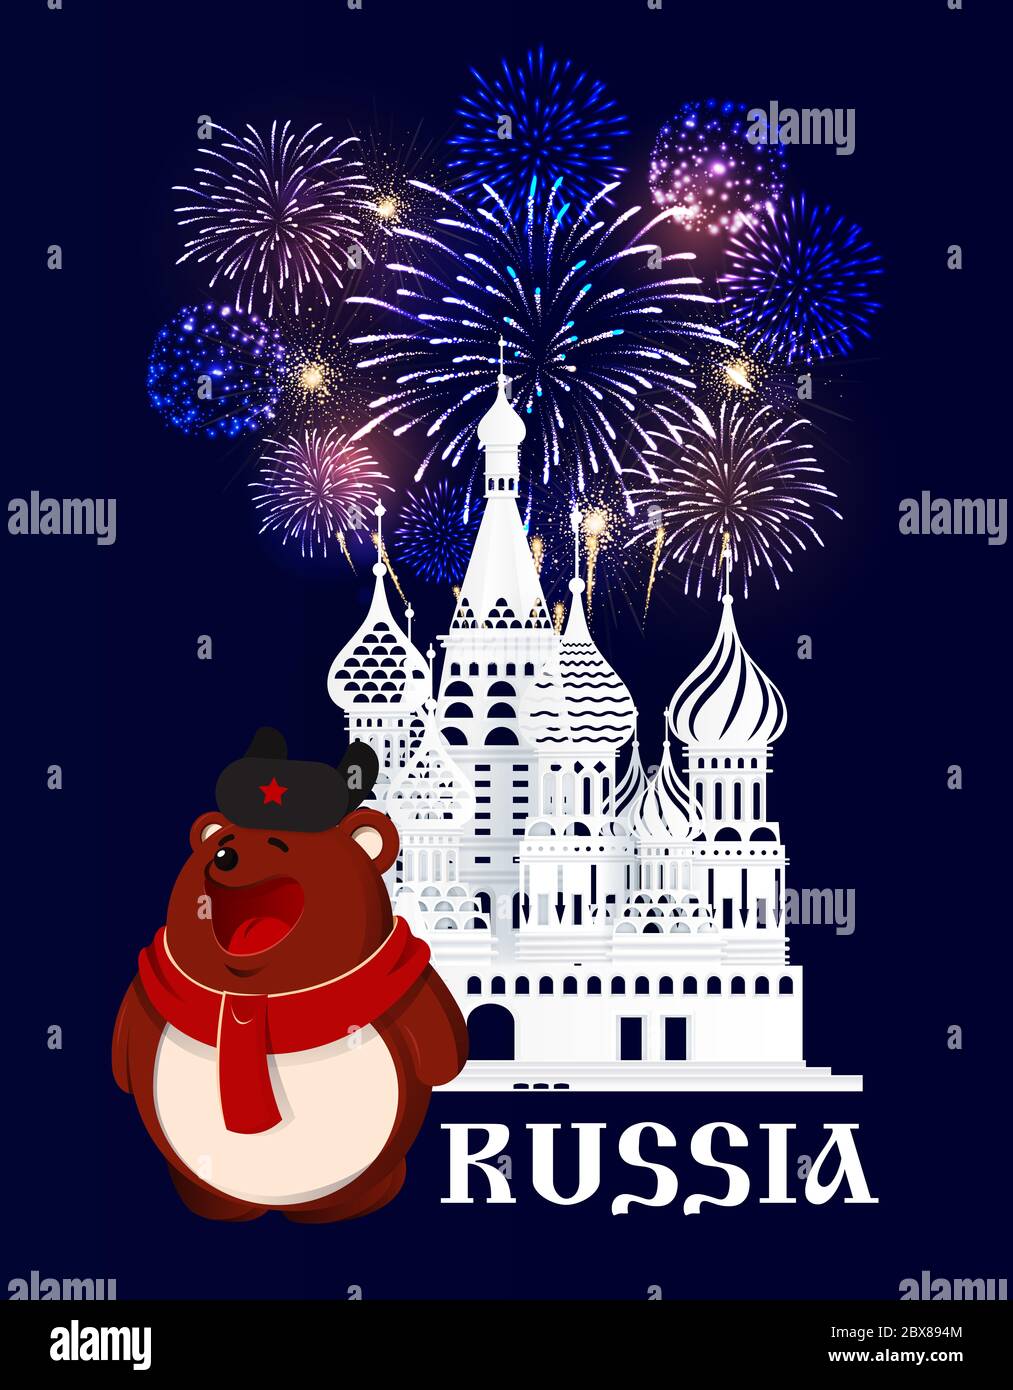 Russia. Moscow. Red Square. Brown bear in scarf and hat stays in front of St. Basil's Cathedral silhouette. Blue background with fireworks. Stock Photo